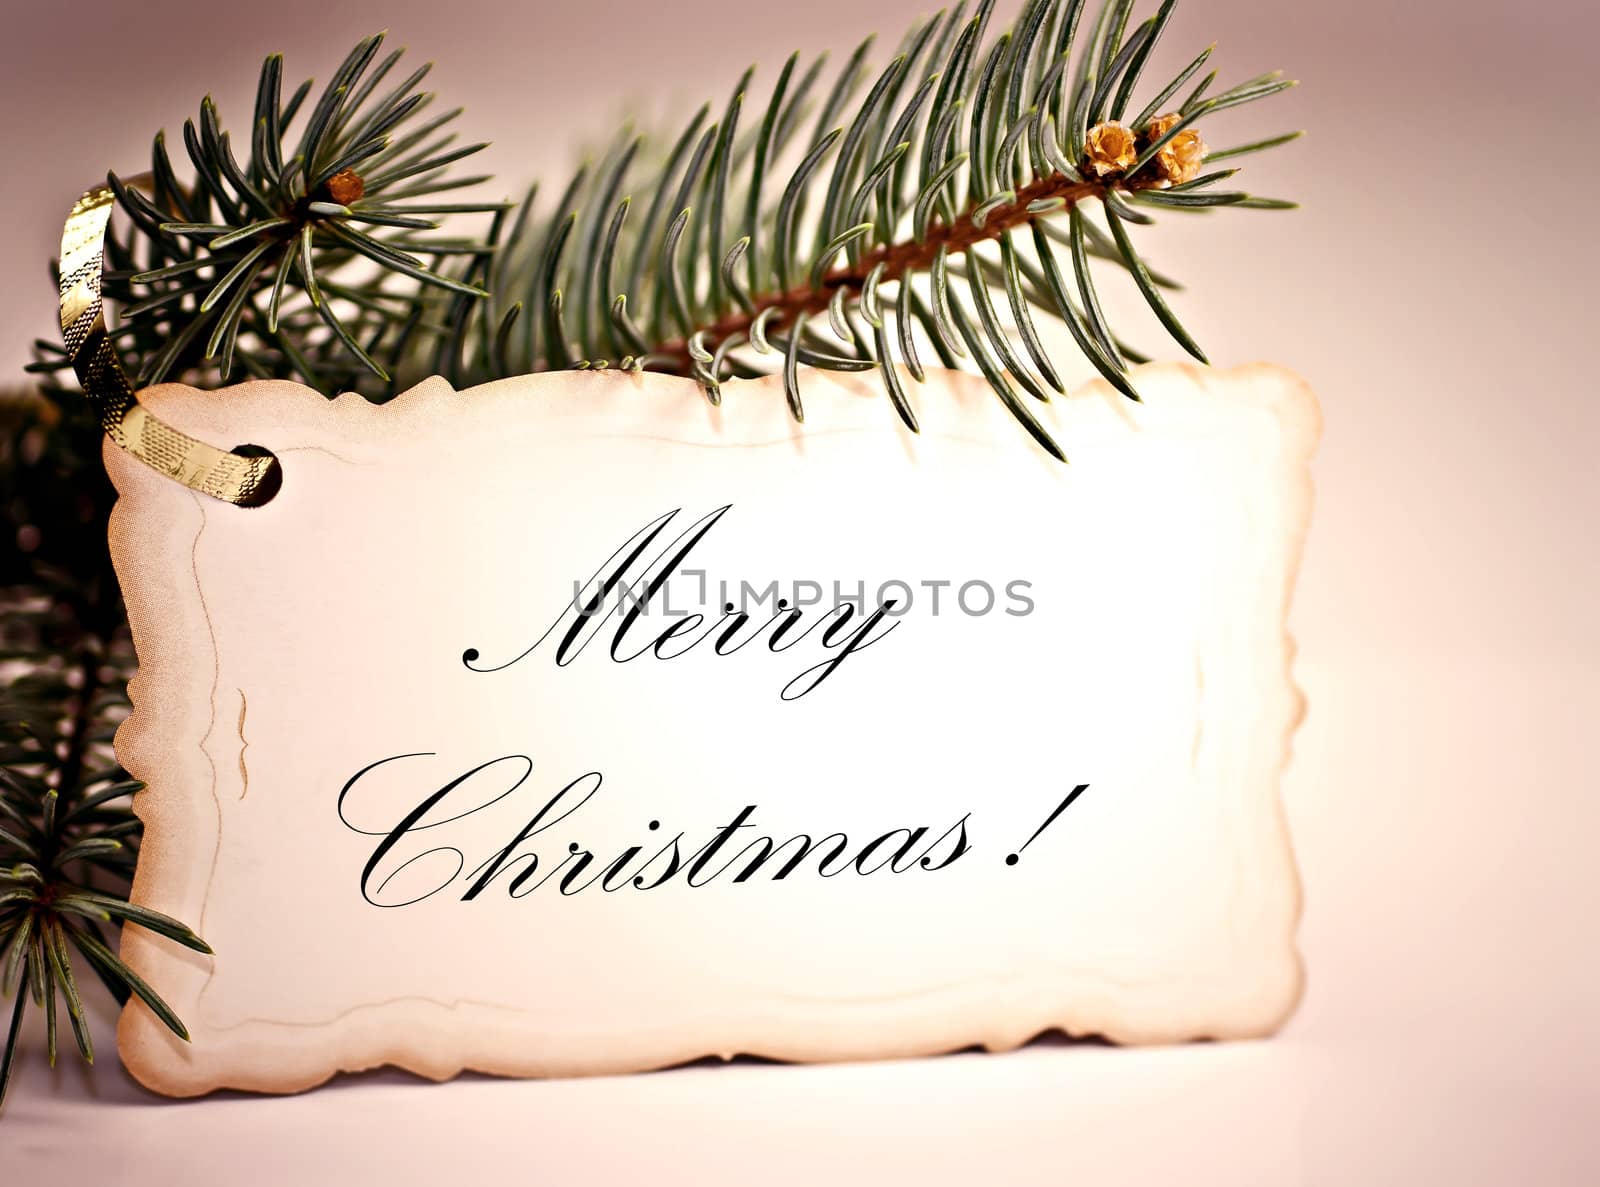 Greeting card with the inscription "Meery Christmas" to spruce branch.
